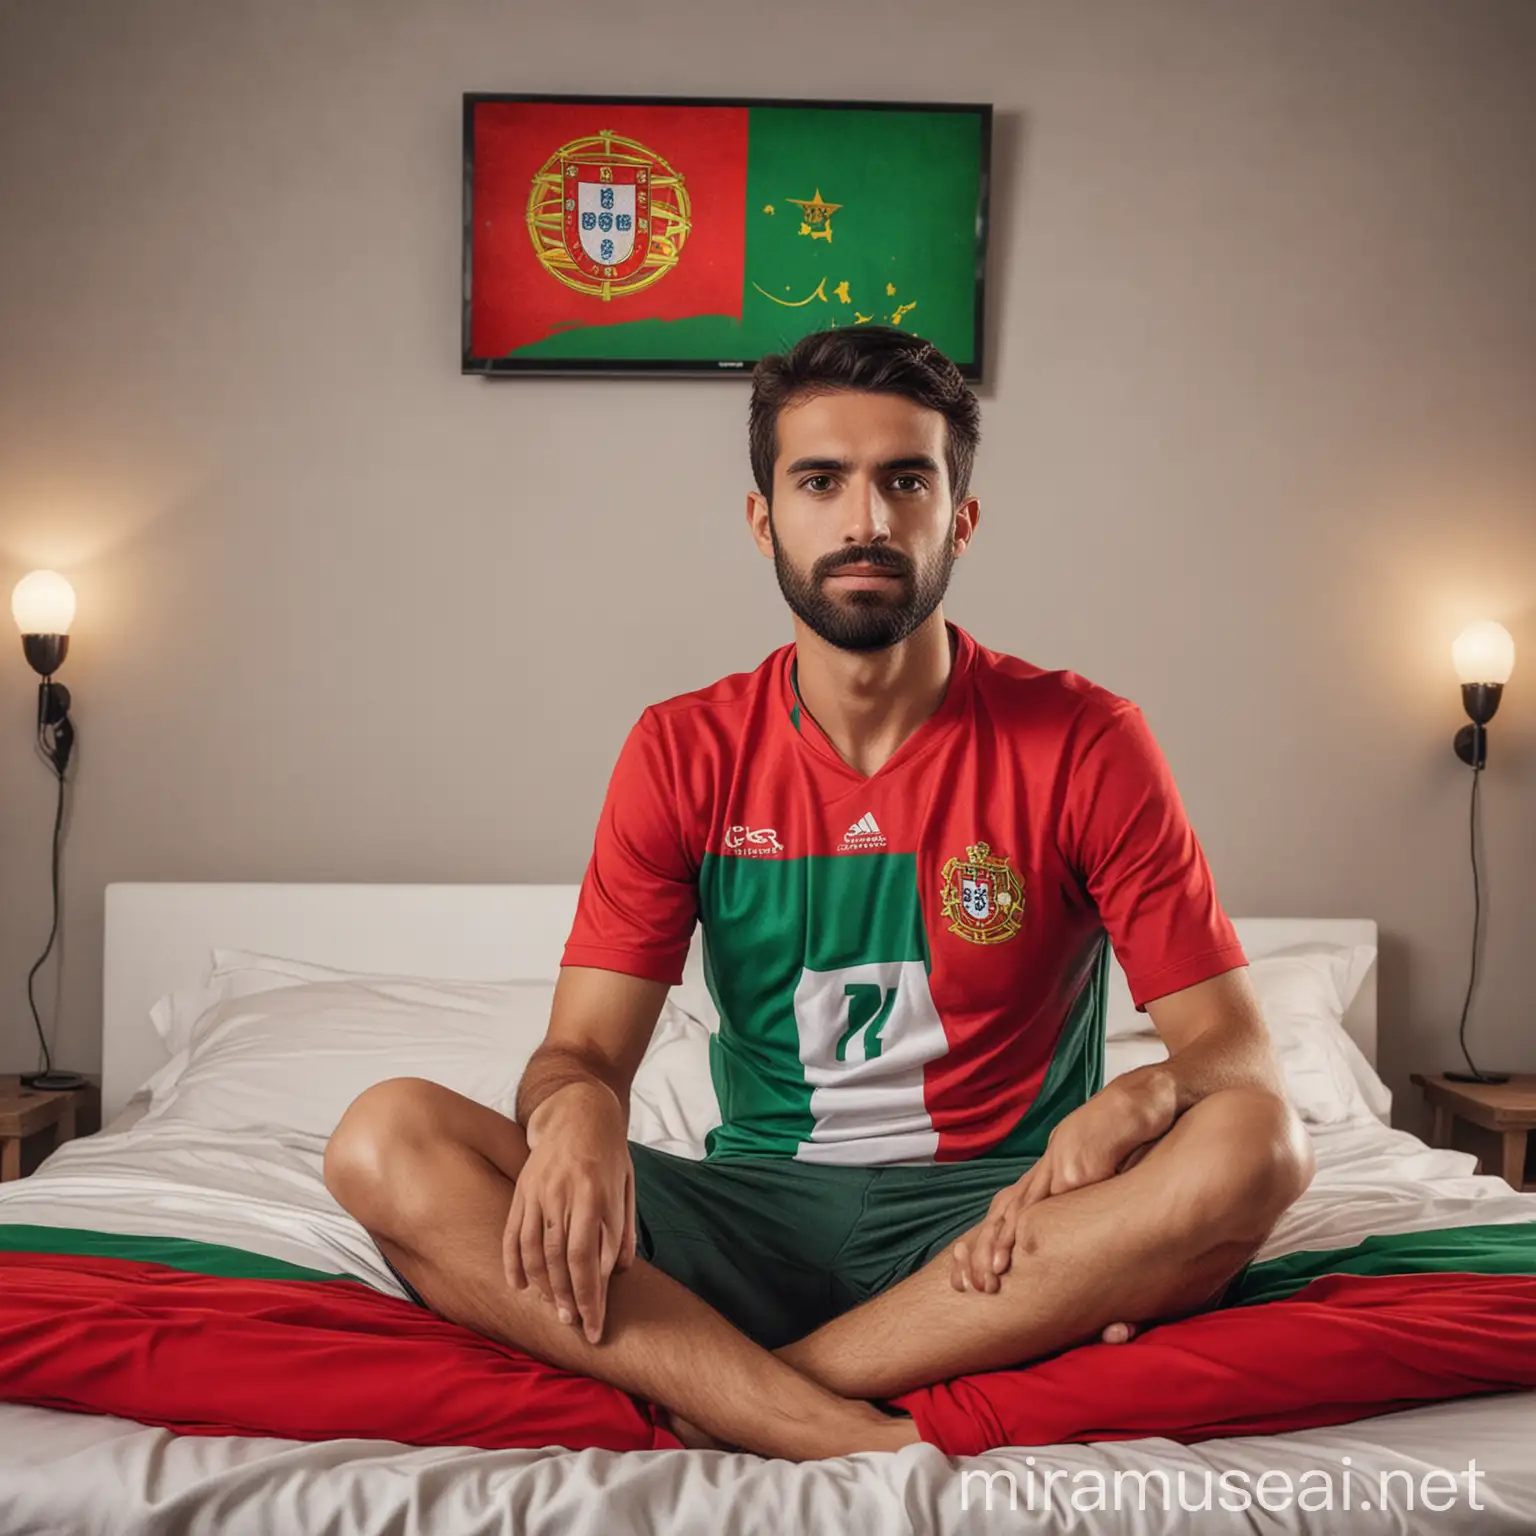 Portuguese Soccer Fan Watching Game on TV from Bed